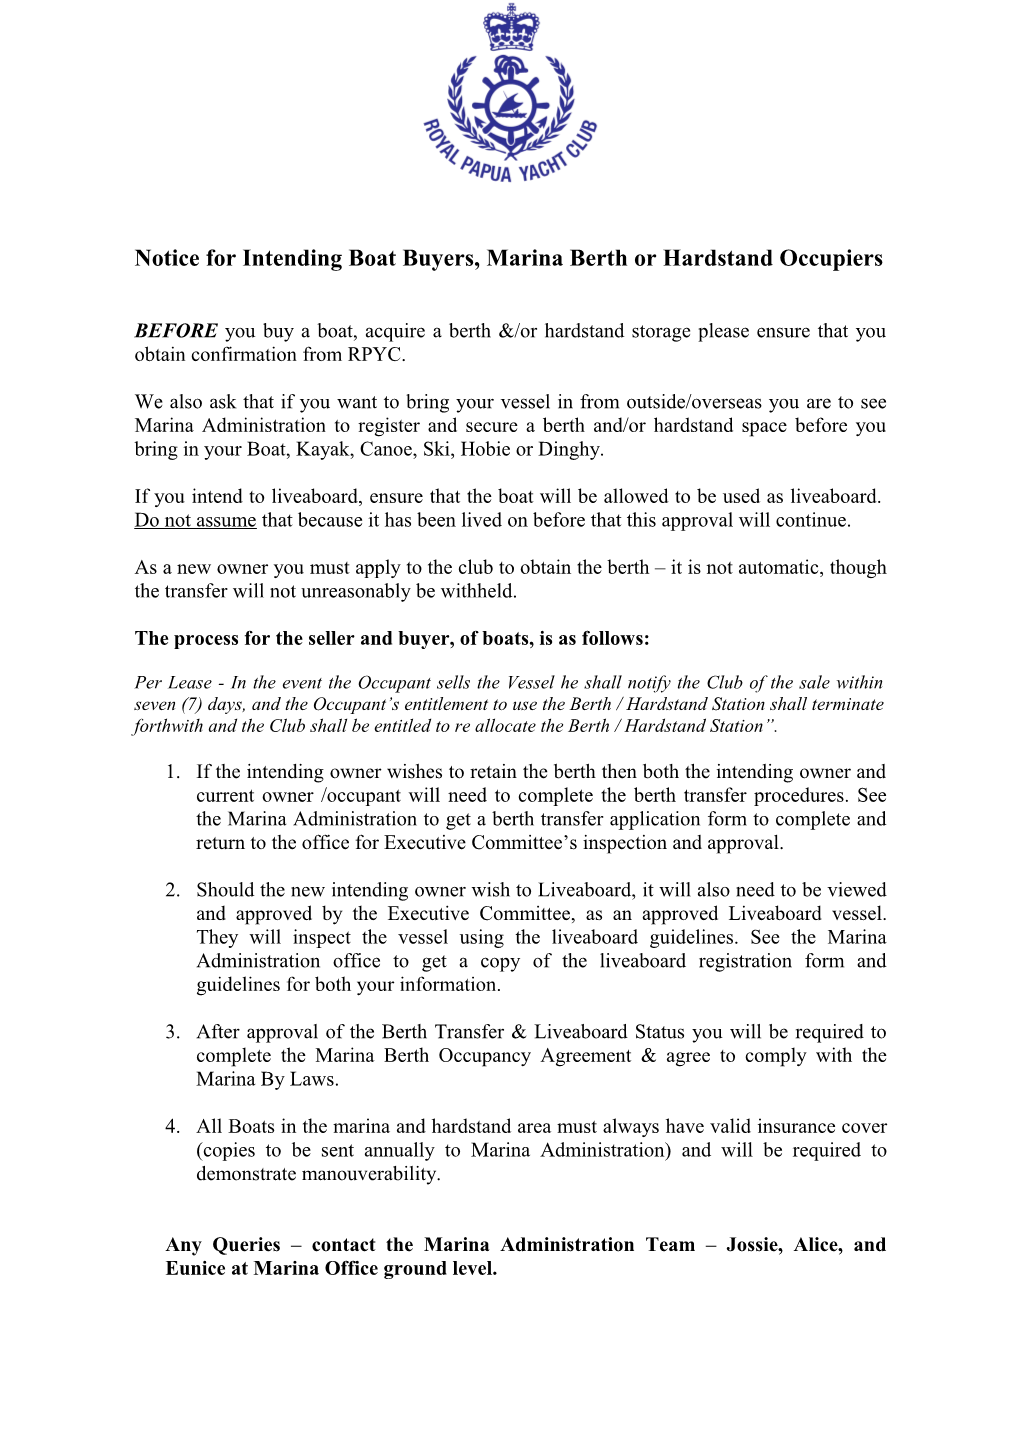 Notice for Intending Boat Buyers, Marina Berth Or Hardstand Occupiers